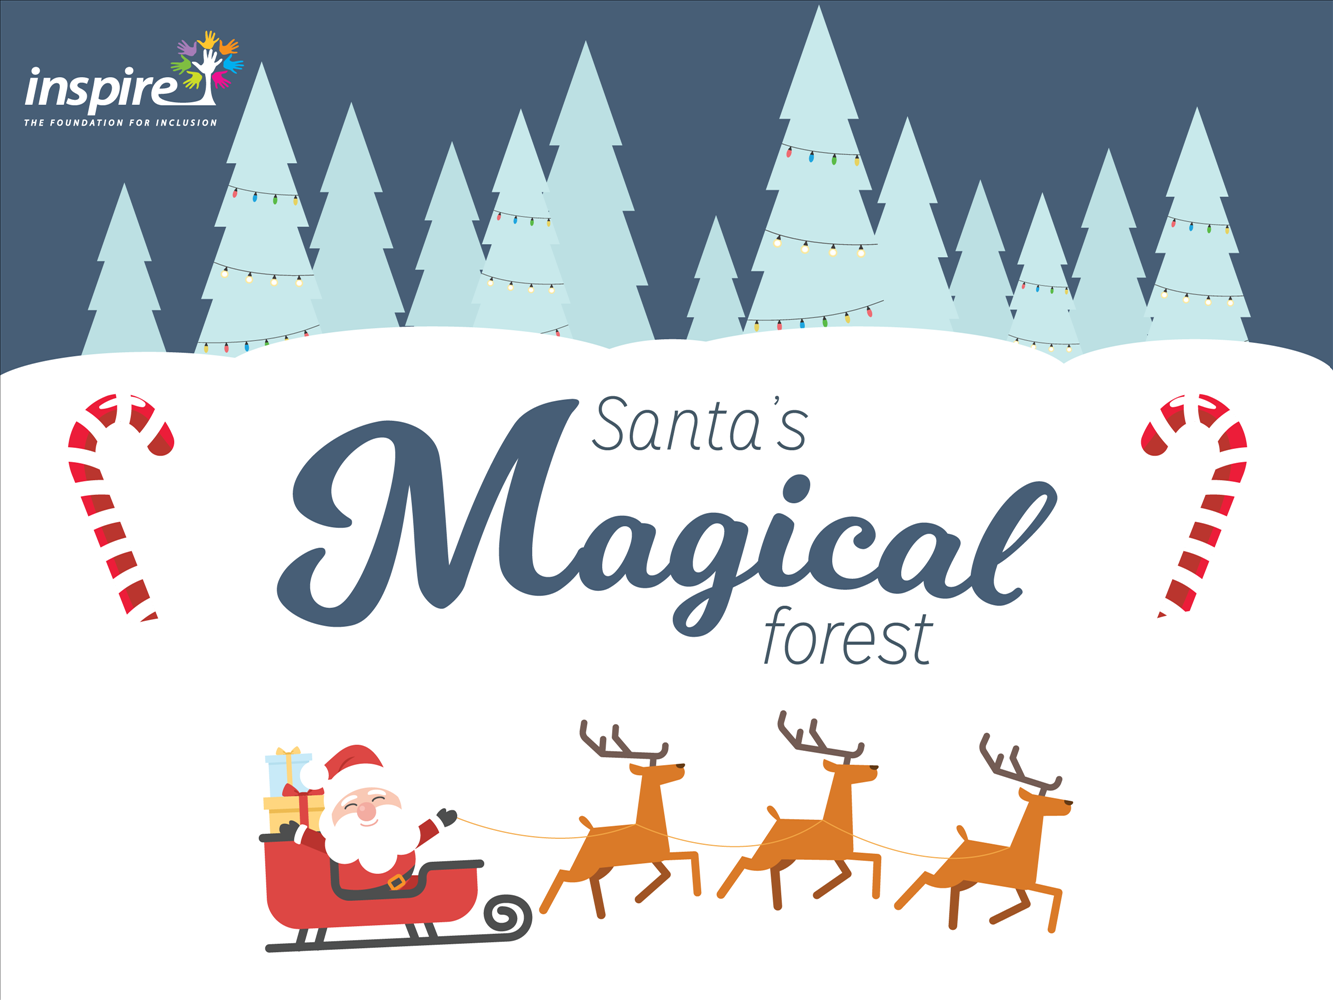 Santa's Magical Forest poster